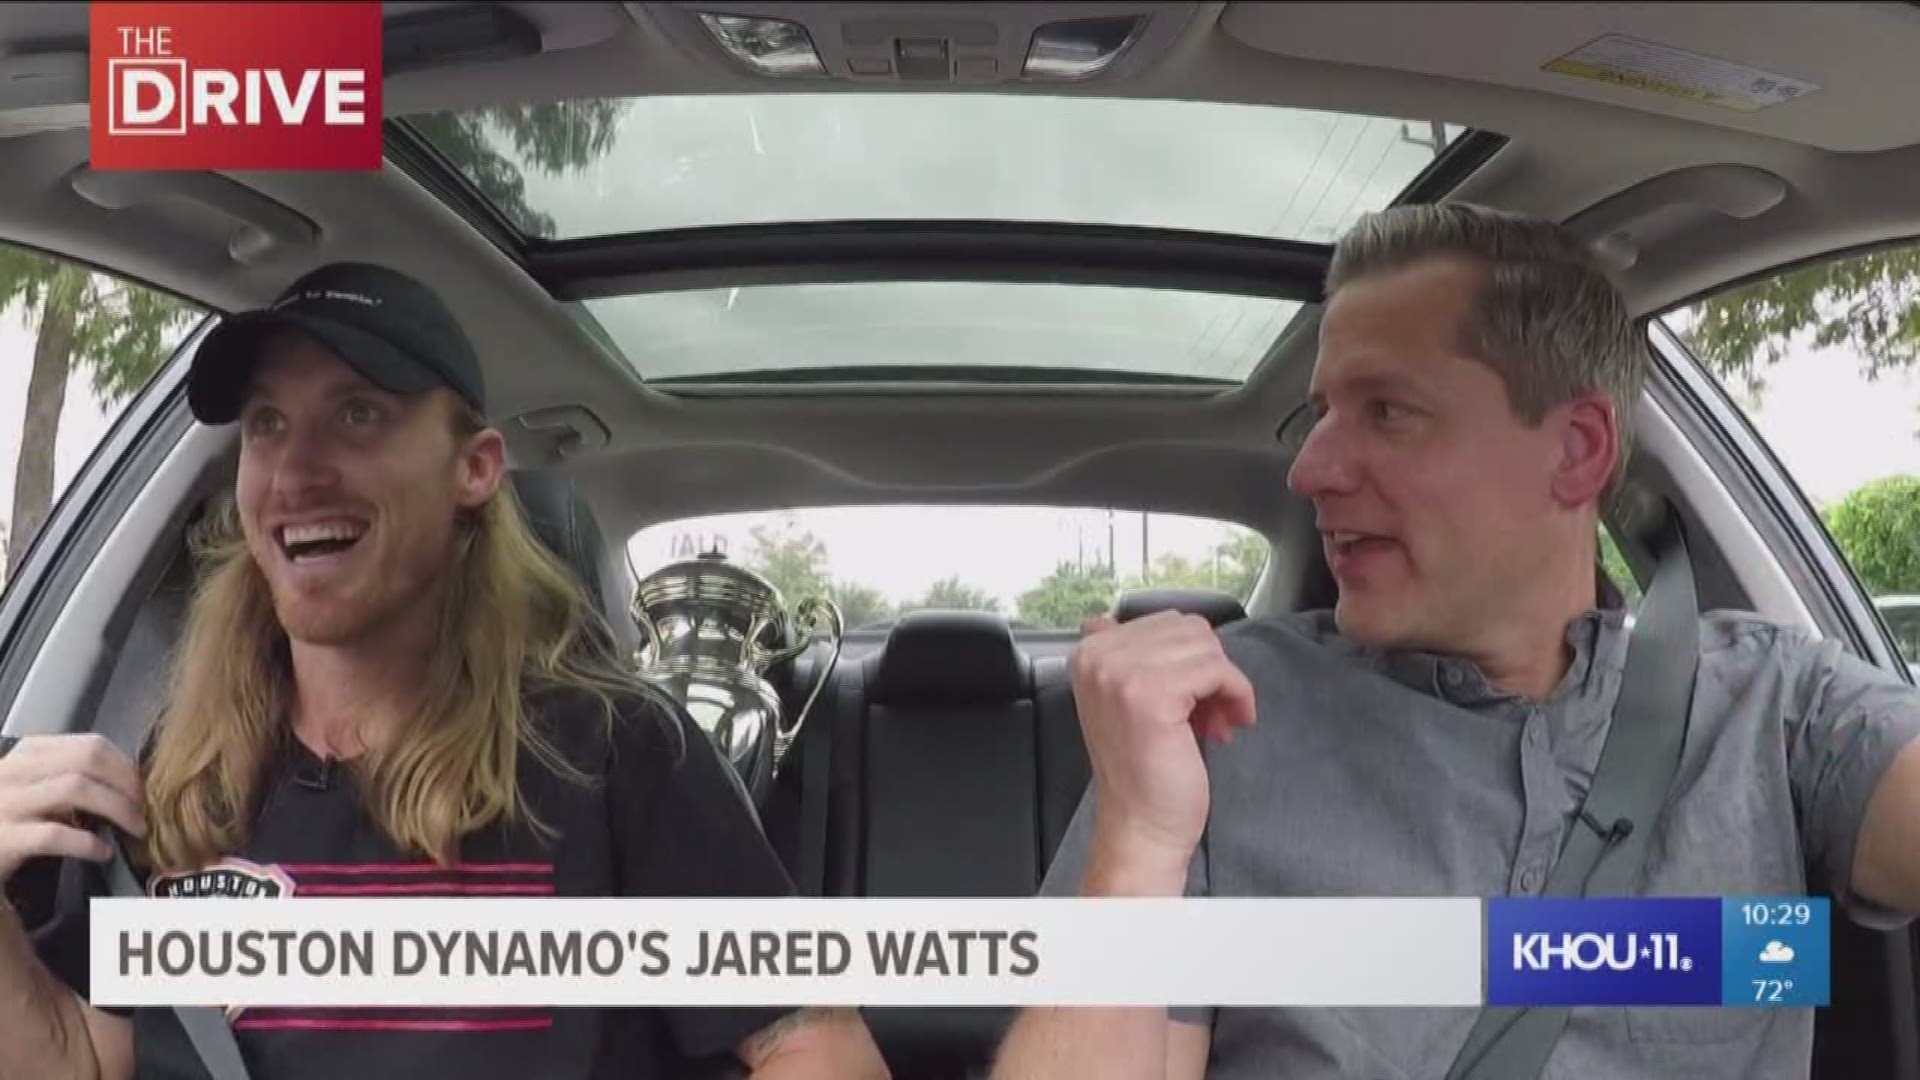 Houston Dynamo defender Jared Watts, fresh off the U.S. Open Cup championship, joins Jason Bristol on "The Drive." They may or may not commit a traffic violation here. Don't tell anyone.